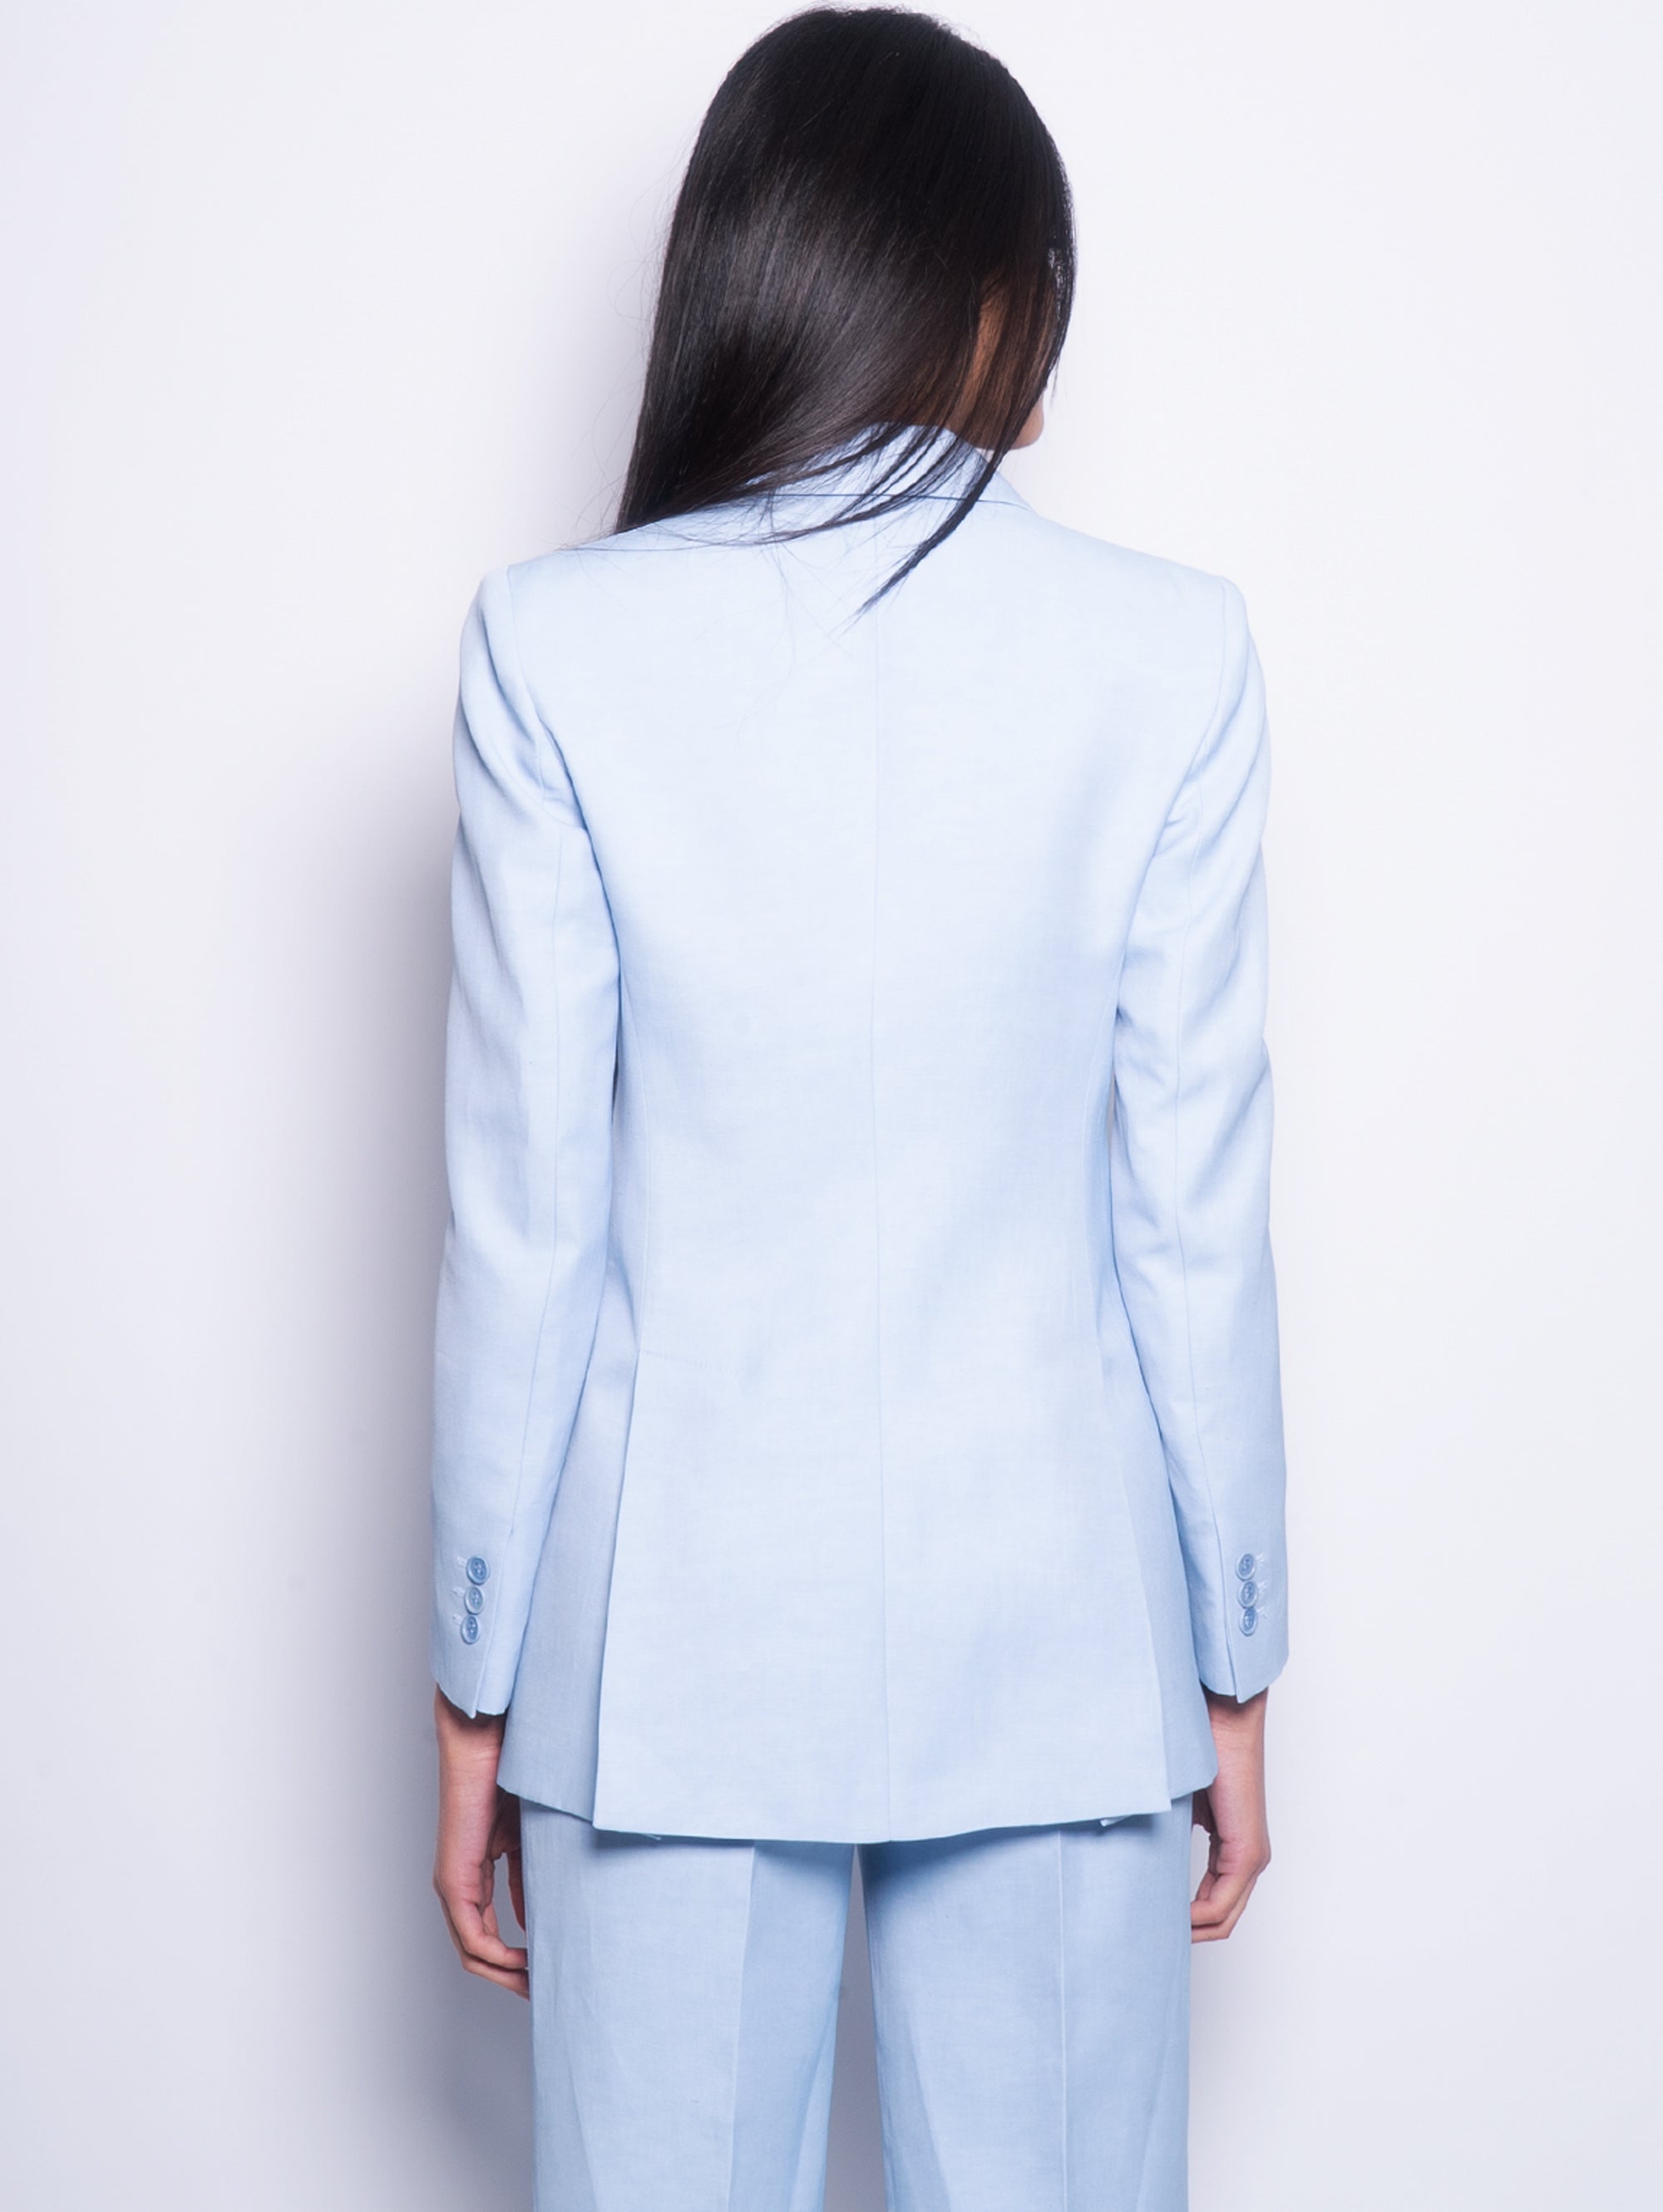 Double-breasted jacket in powder blue linen